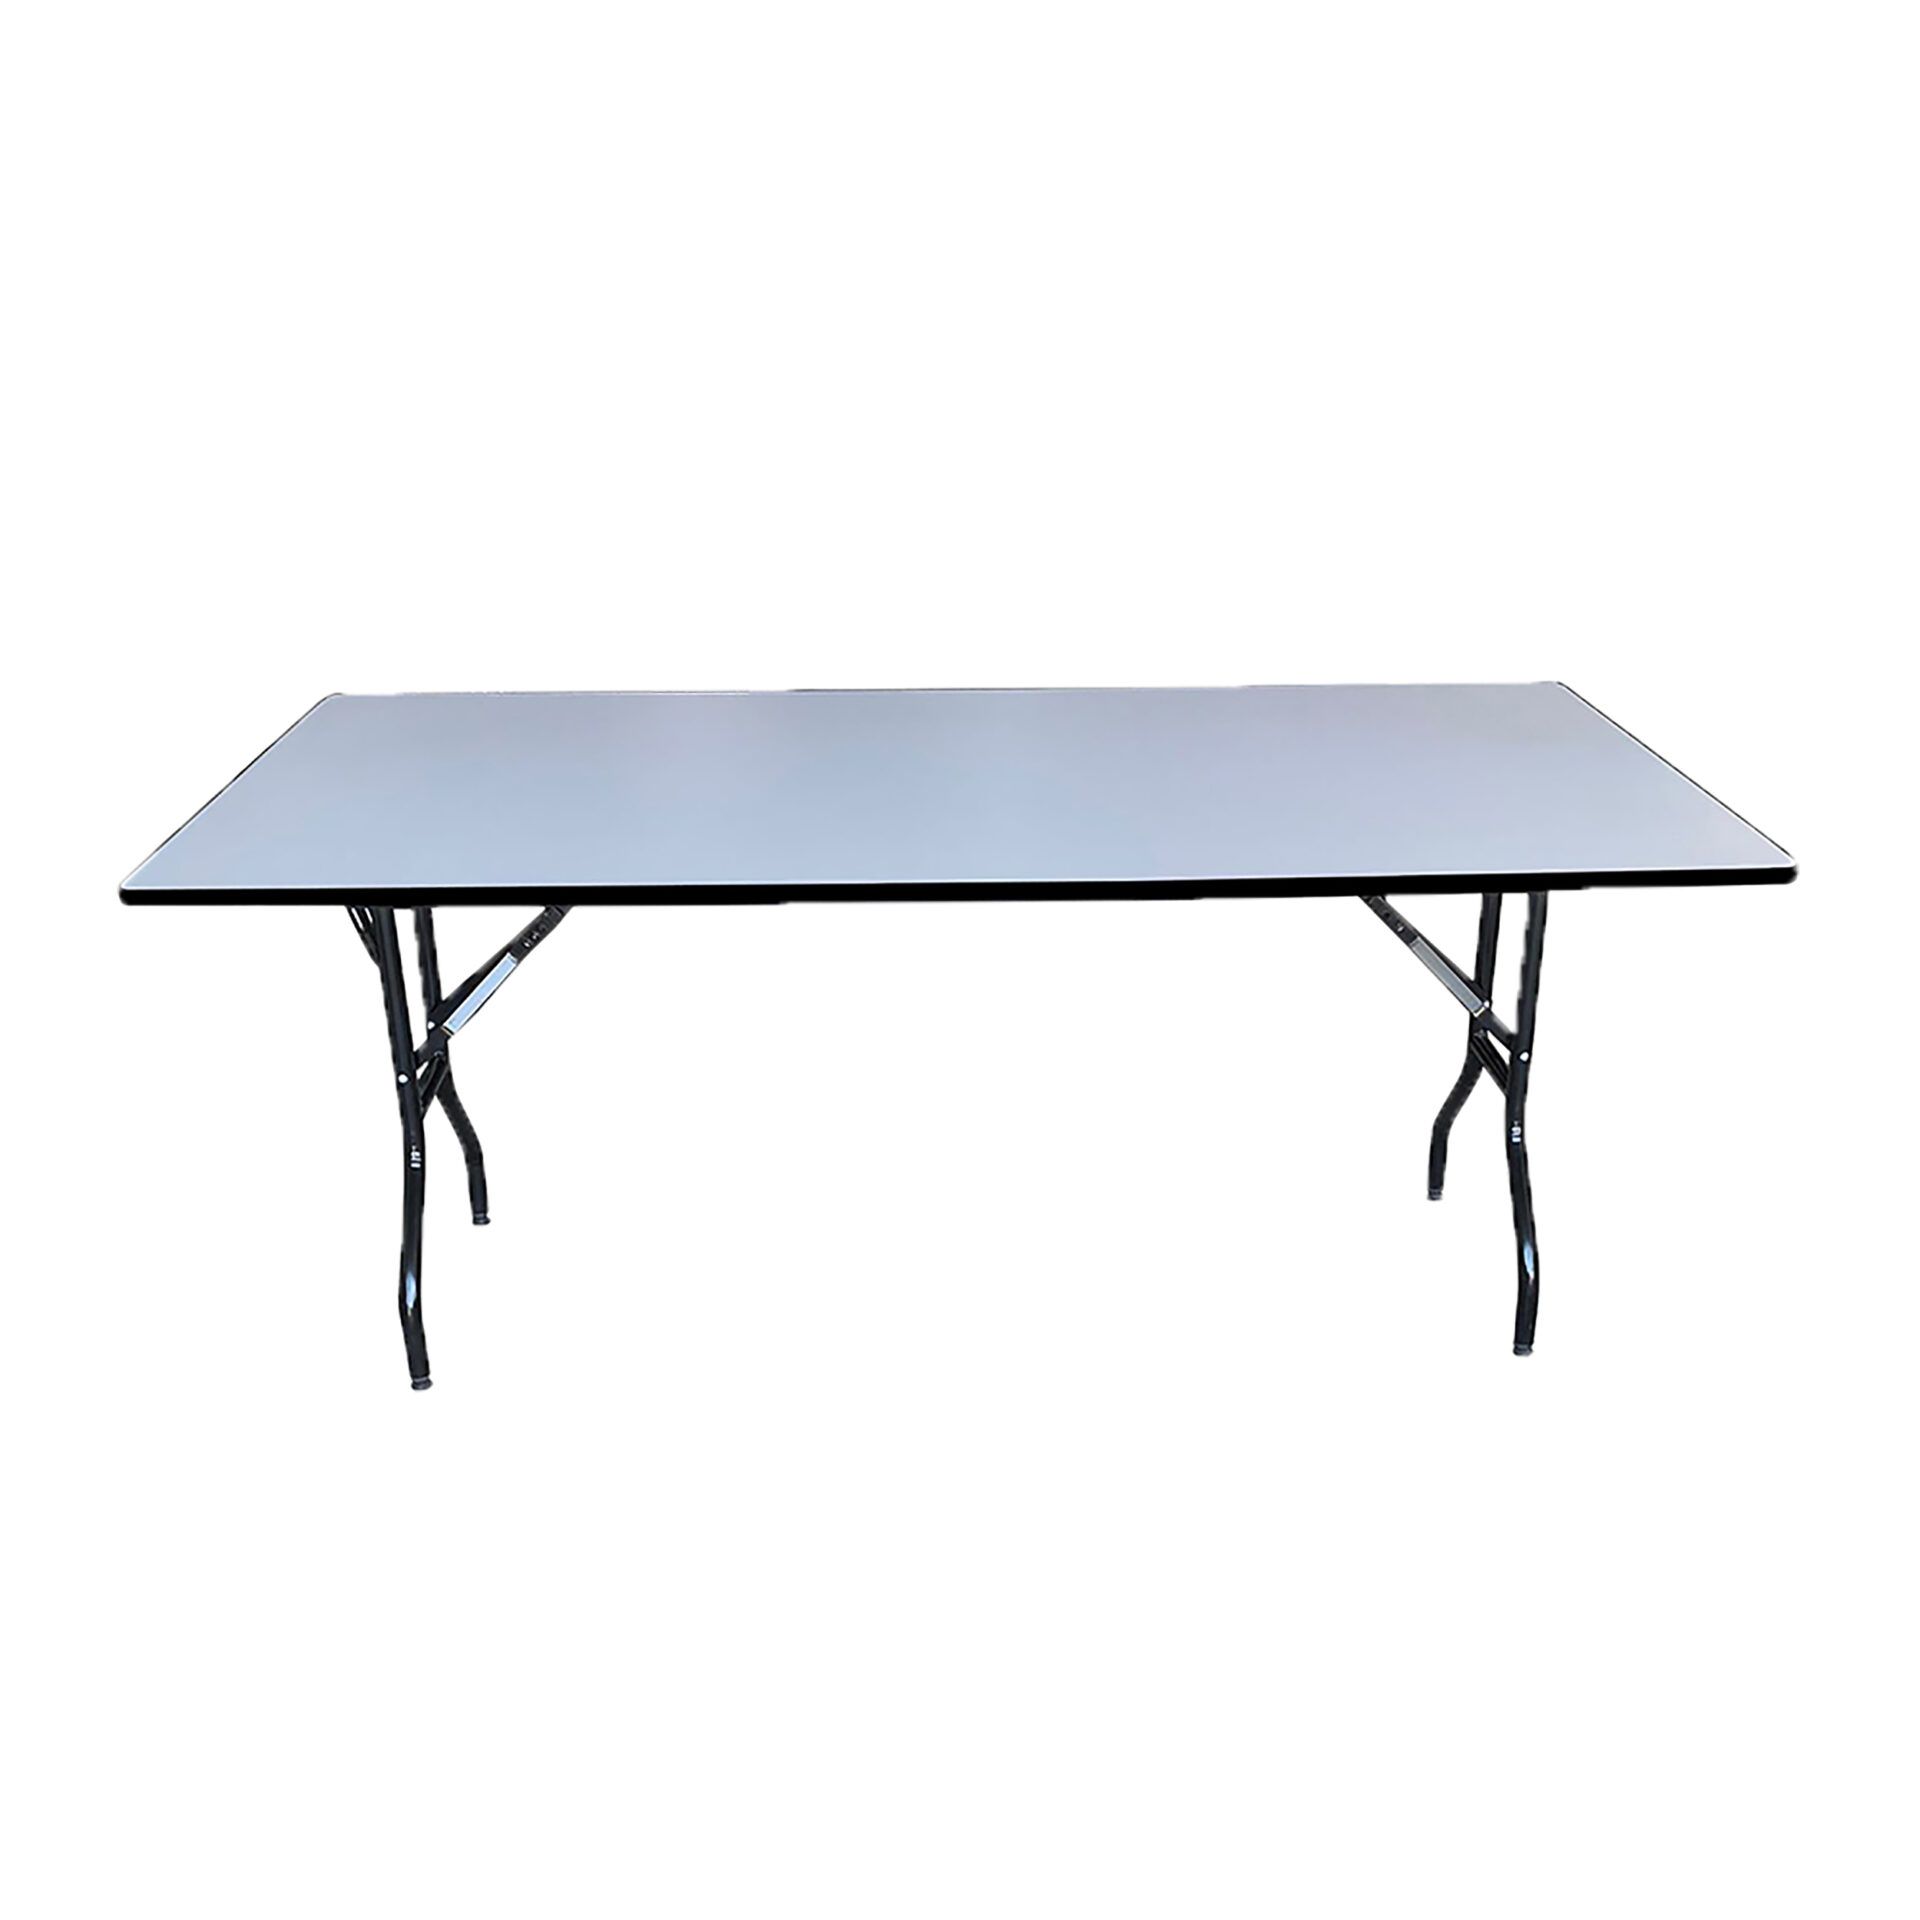 Deluxe Banquet Table 1800x900 Rectangle - White